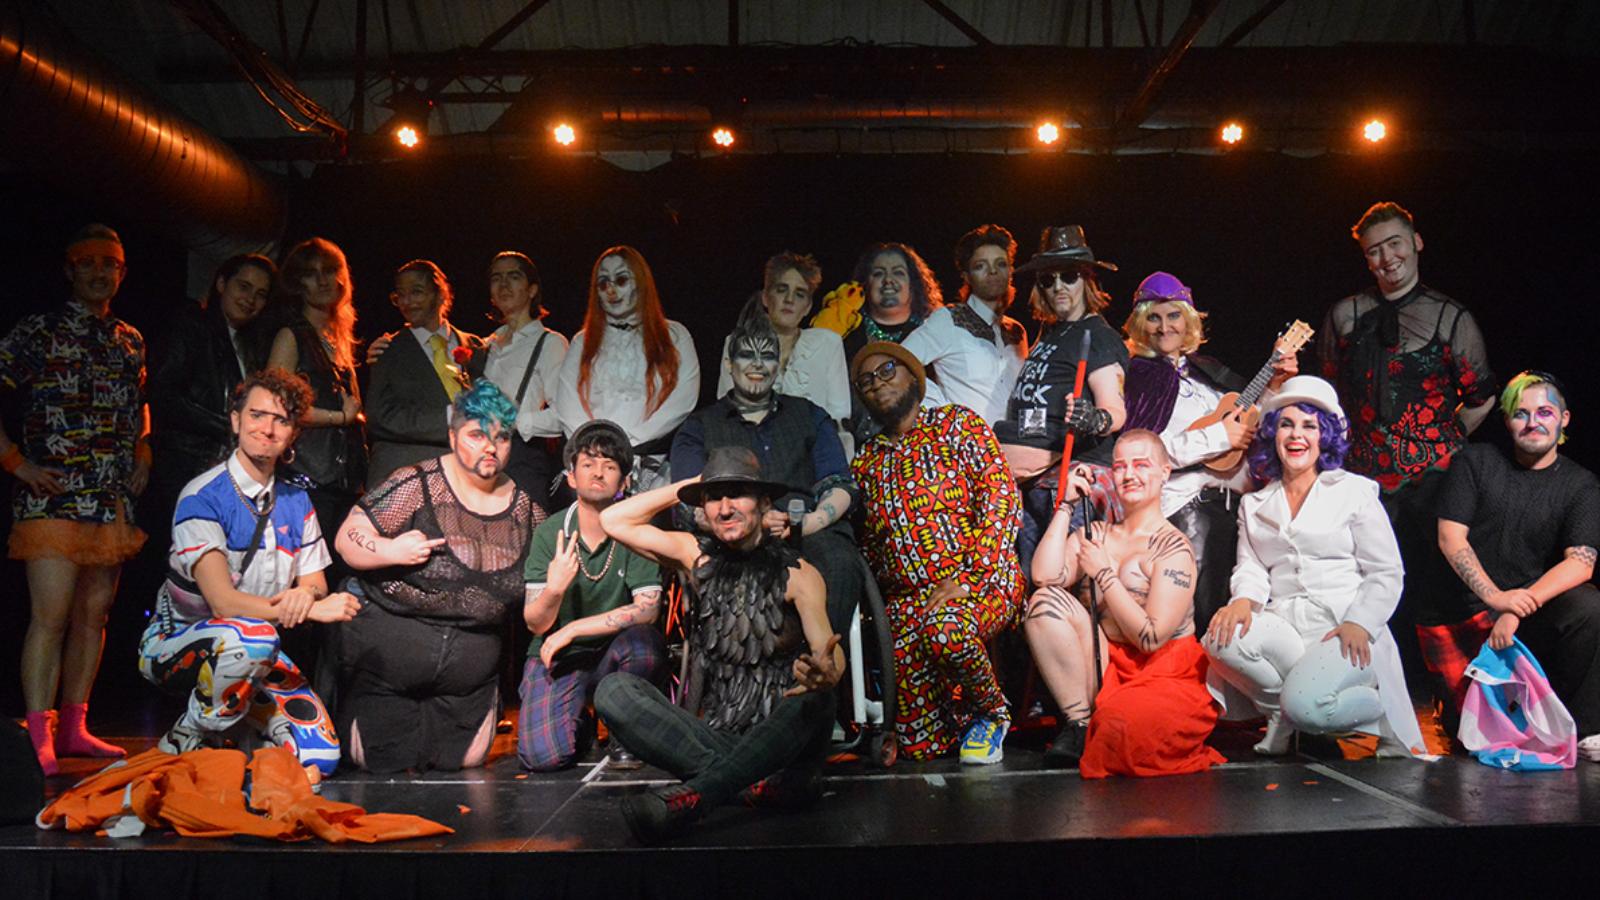 A group of drag kings stand on stage together